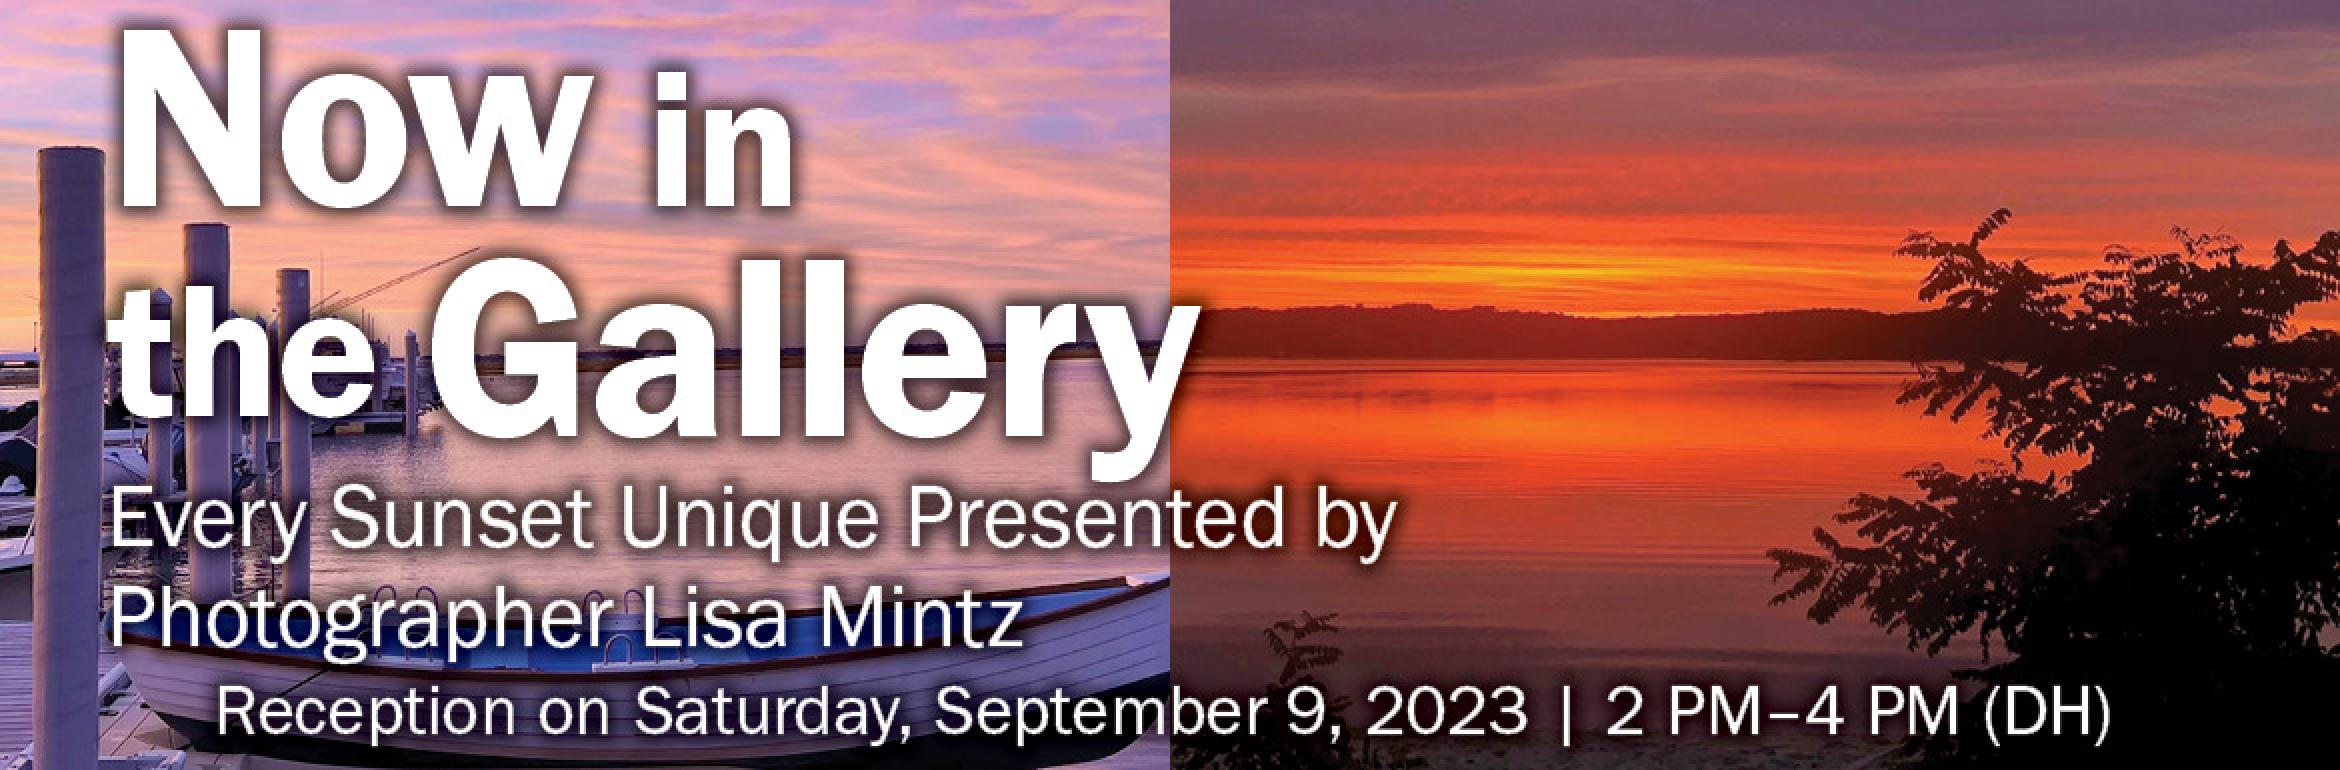 Now in the Gallery. Every Sunset Unique Presented by Photographer Lisa Mintz. Reception on Saturday, September 9, 2023 | 2 PM–4 PM (DH).